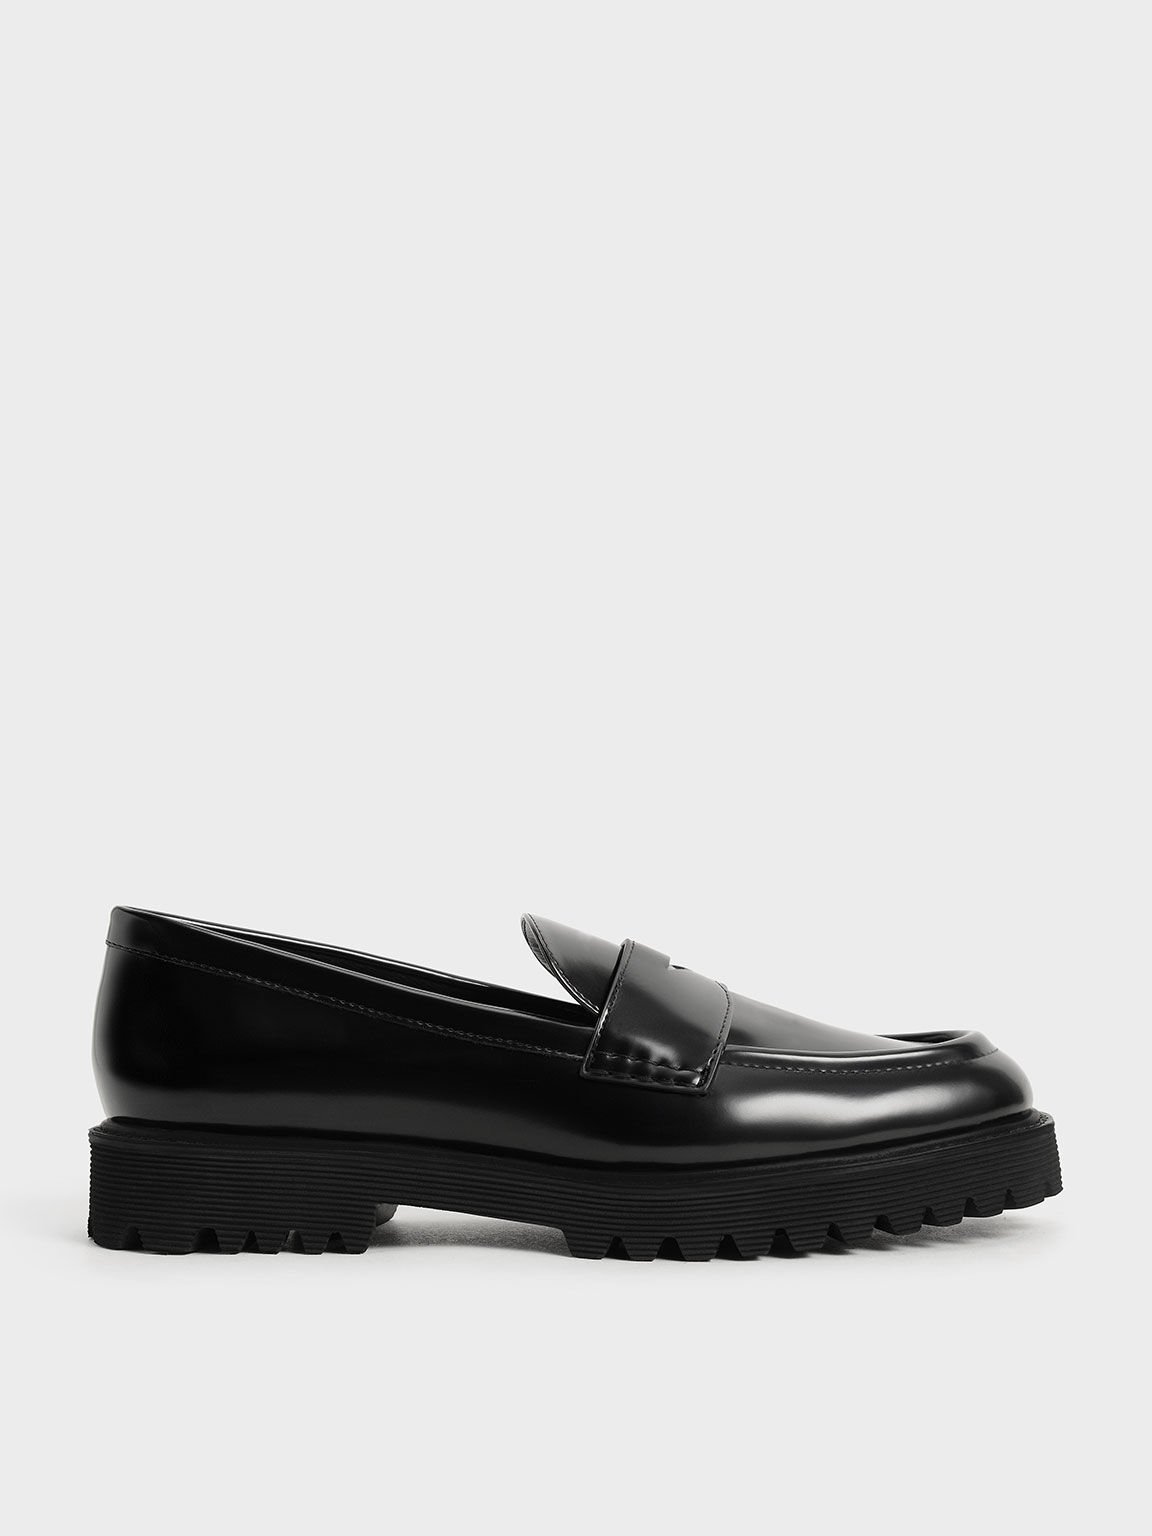 Women's Flat Loafers | Shop Exclusive Styles | CHARLES & KEITH SG